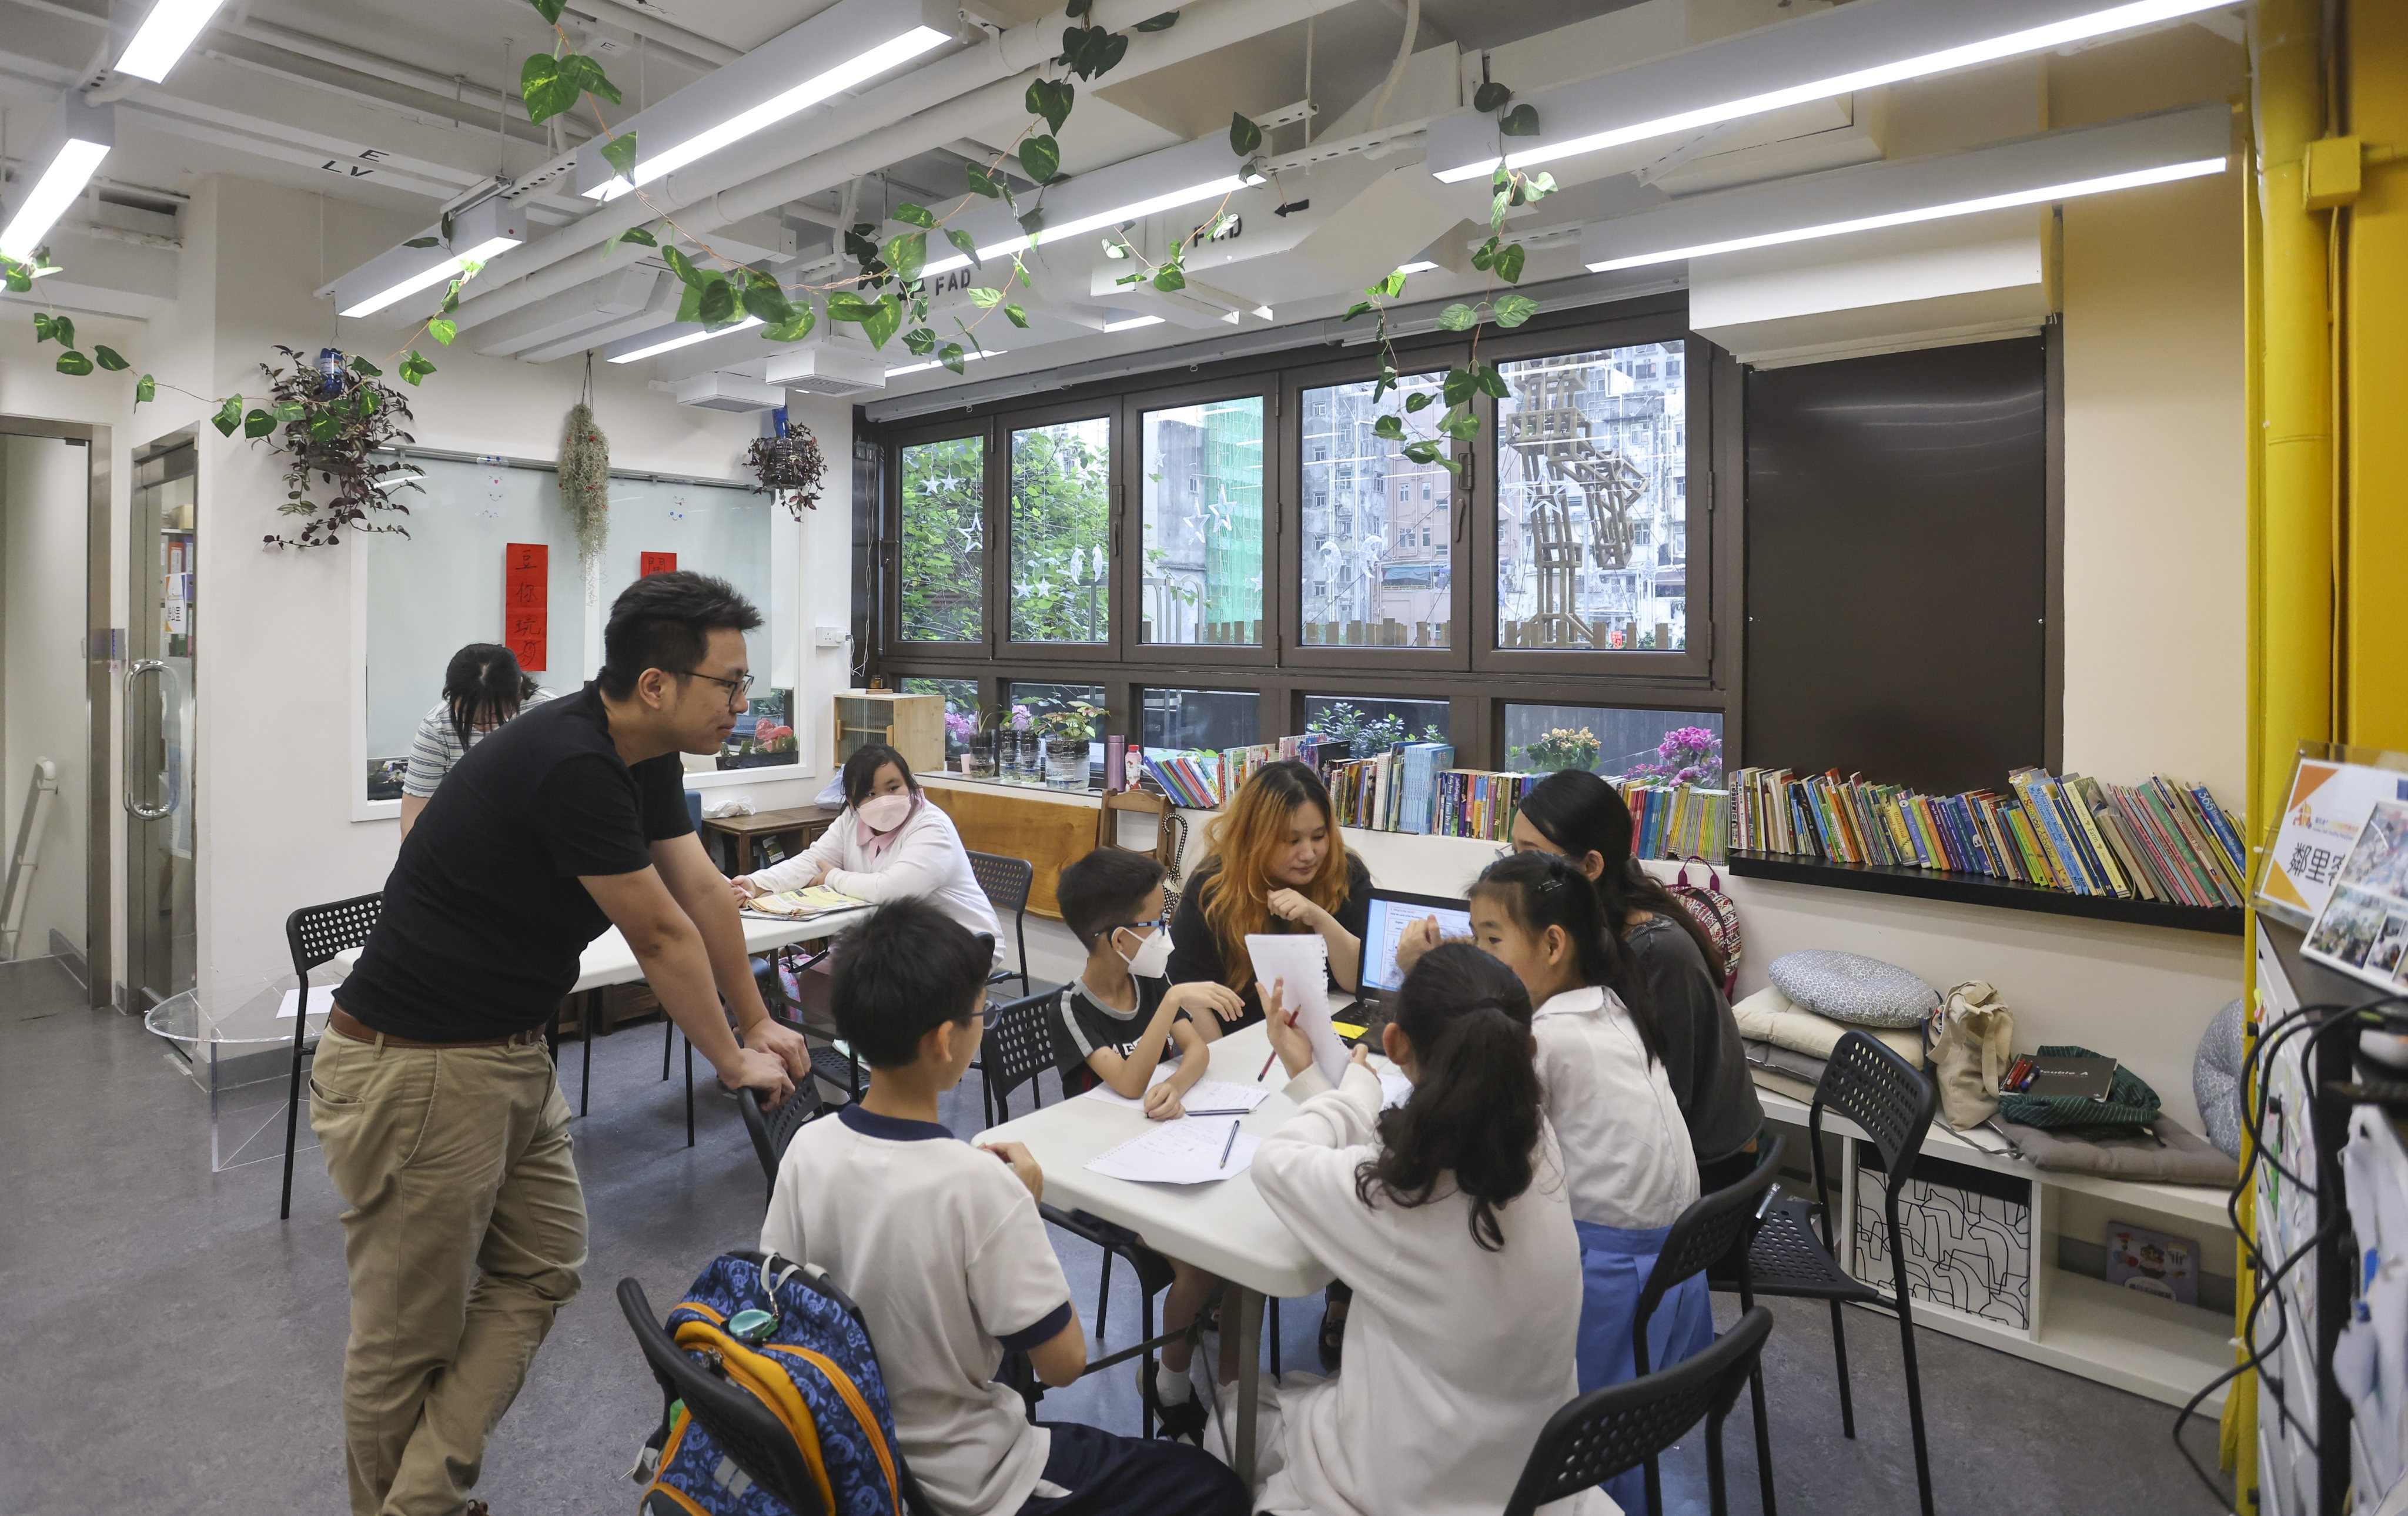 The Jockey Club Healthy Neighbourhood Kitchen Project in Sai Wan gives underprivileged households space to work and study, prepare meals and spend time together. Photo: Jonathan Wong